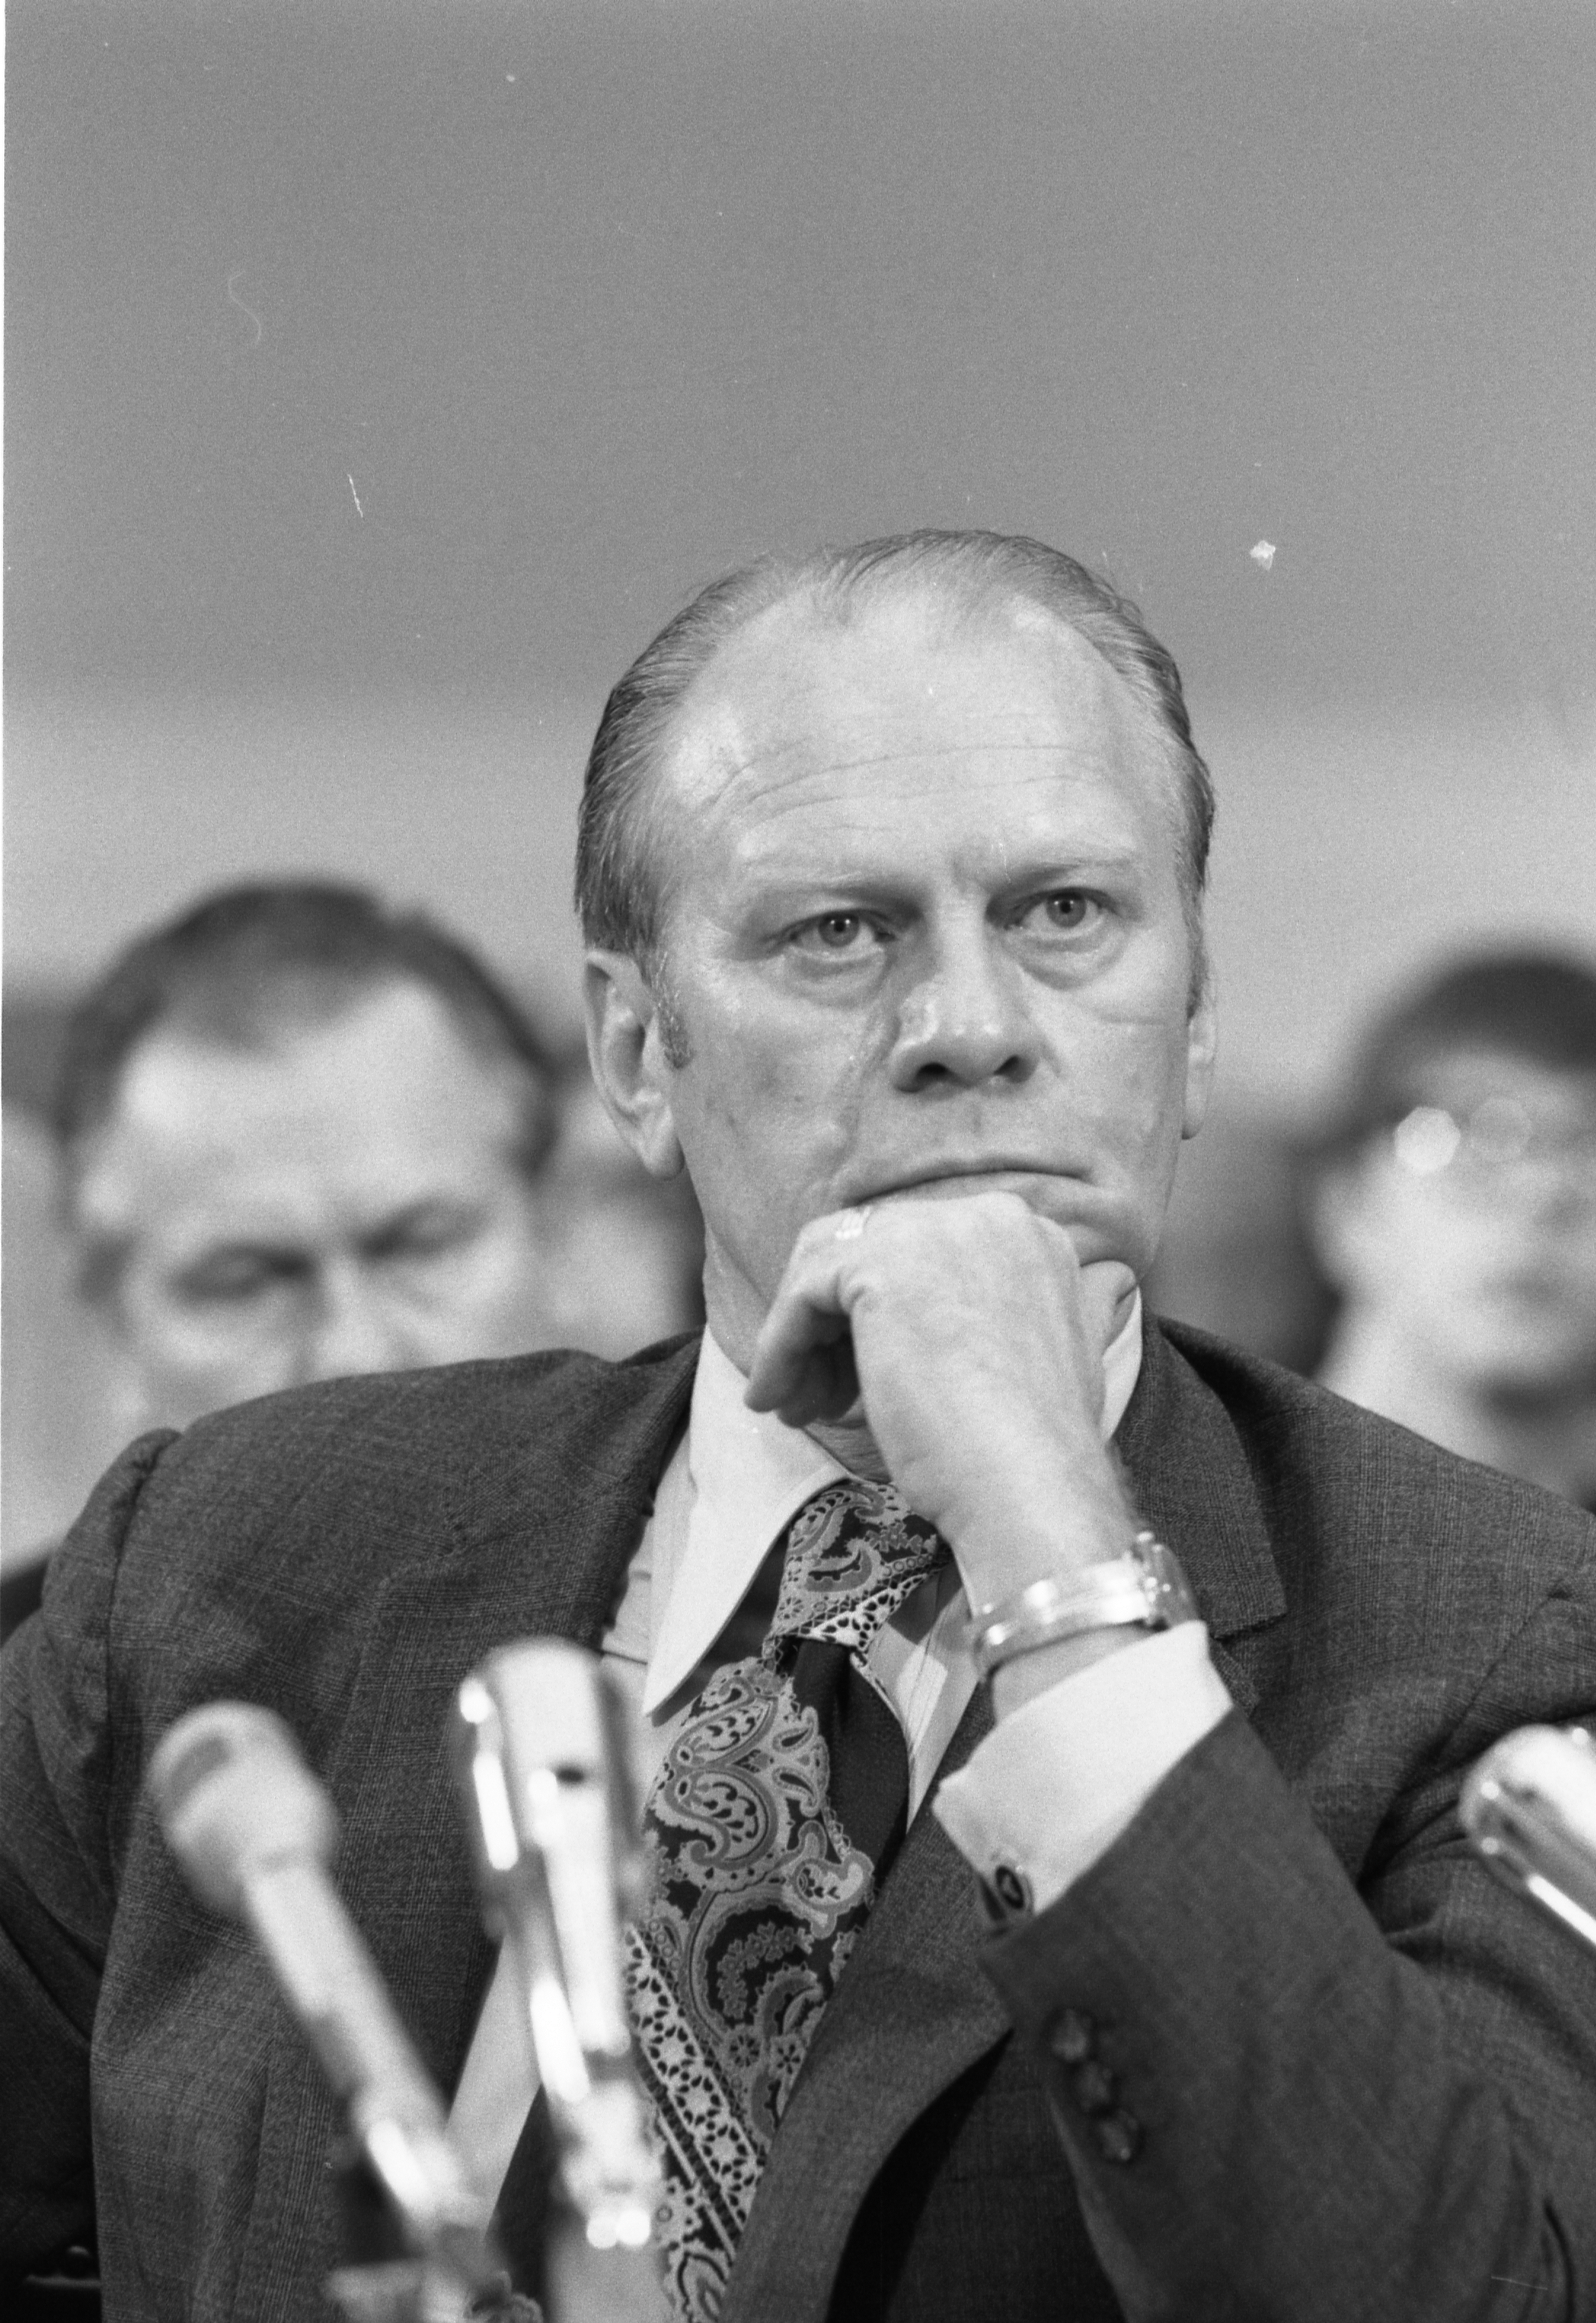 Gerald R. Ford at his Vice Presidential confirmation hearing before the House Judiciary Committee, 11/15/1973.